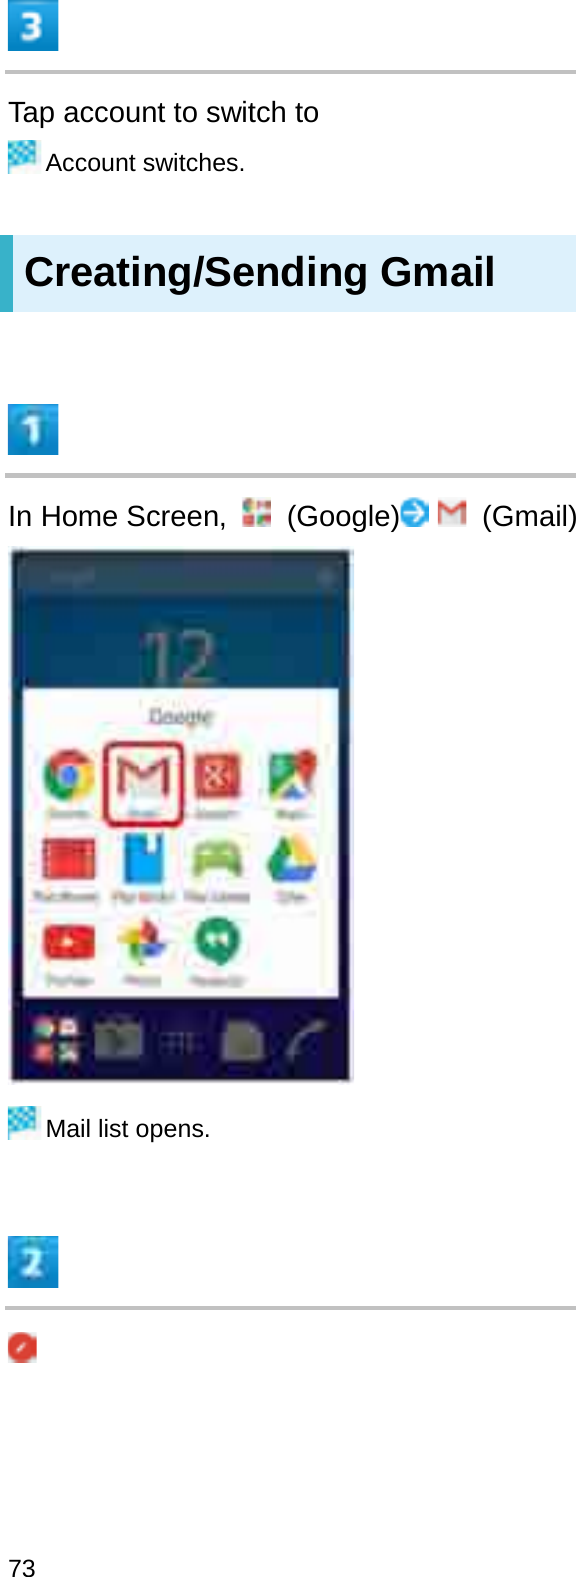 Tap account to switch toAccount switches.Creating/Sending GmailIn Home Screen,  (Google) (Gmail)Mail list opens.73